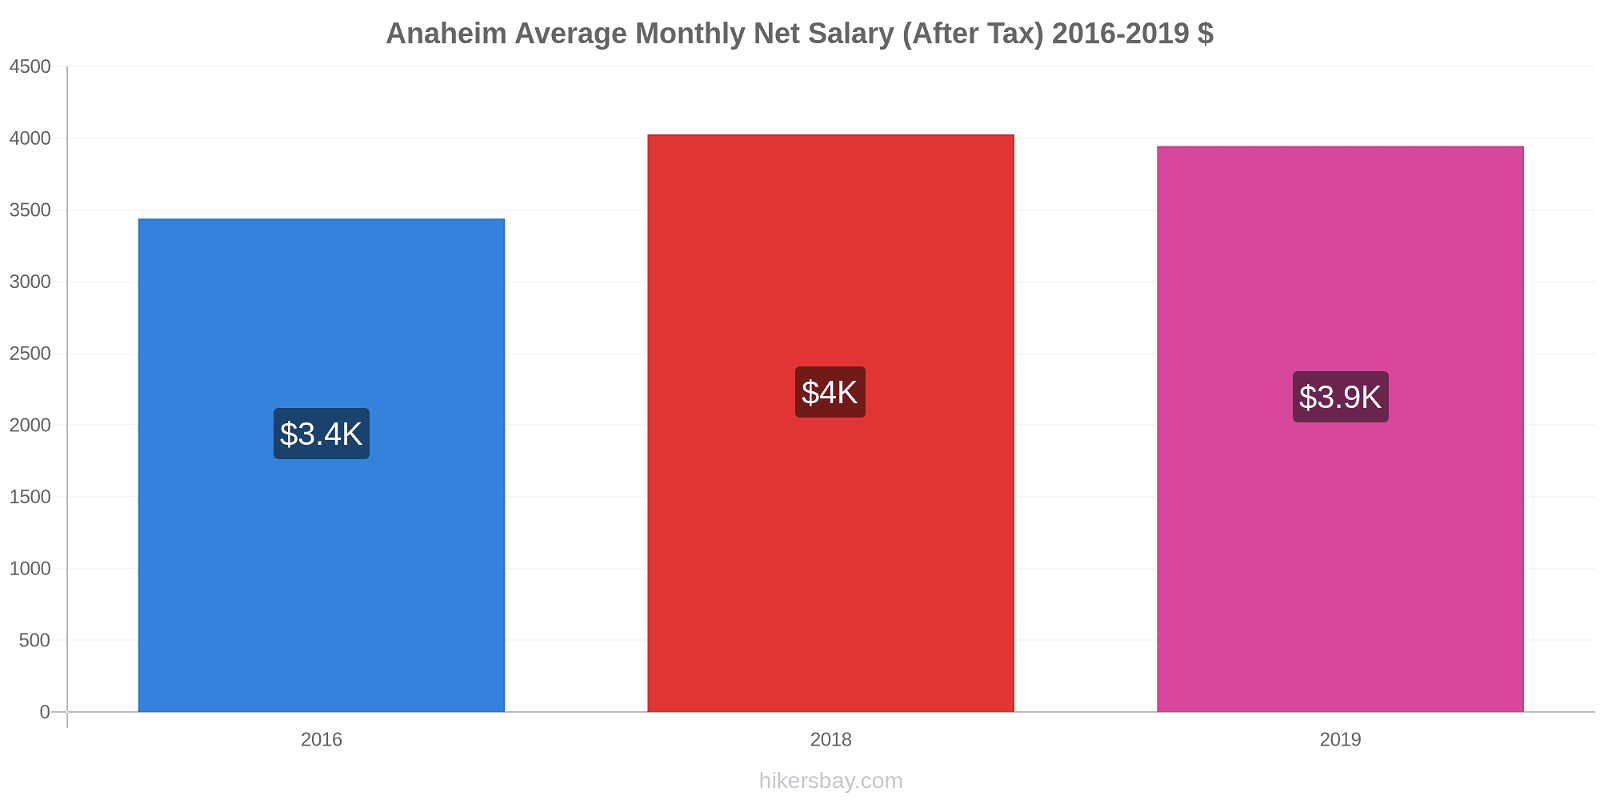 Anaheim price changes Average Monthly Net Salary (After Tax) hikersbay.com